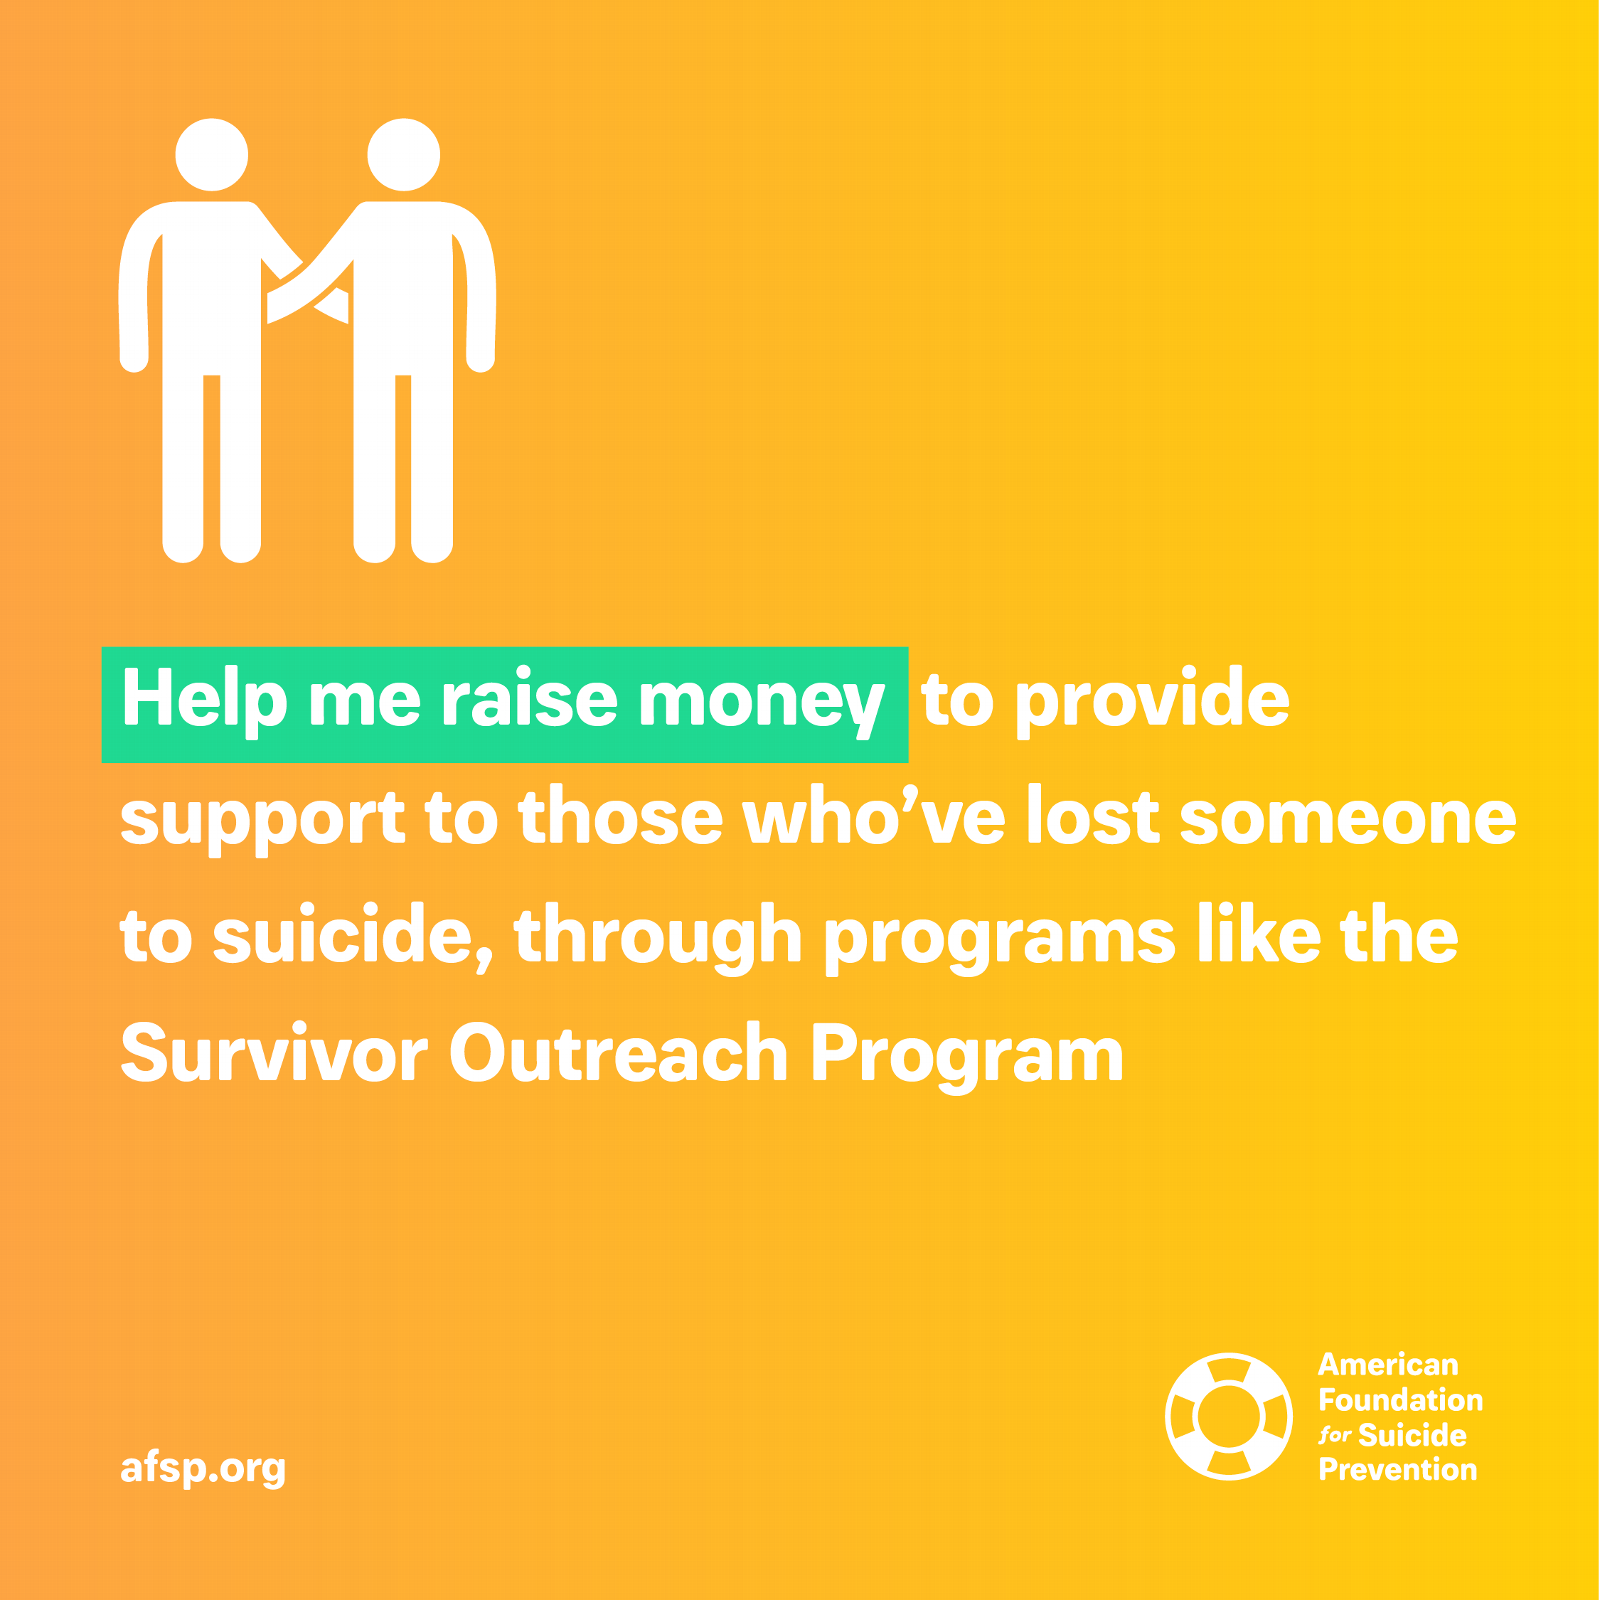 Help me raise money to provide support to those who've lost someone to suicide, through programs like the Survivor Outreach Program